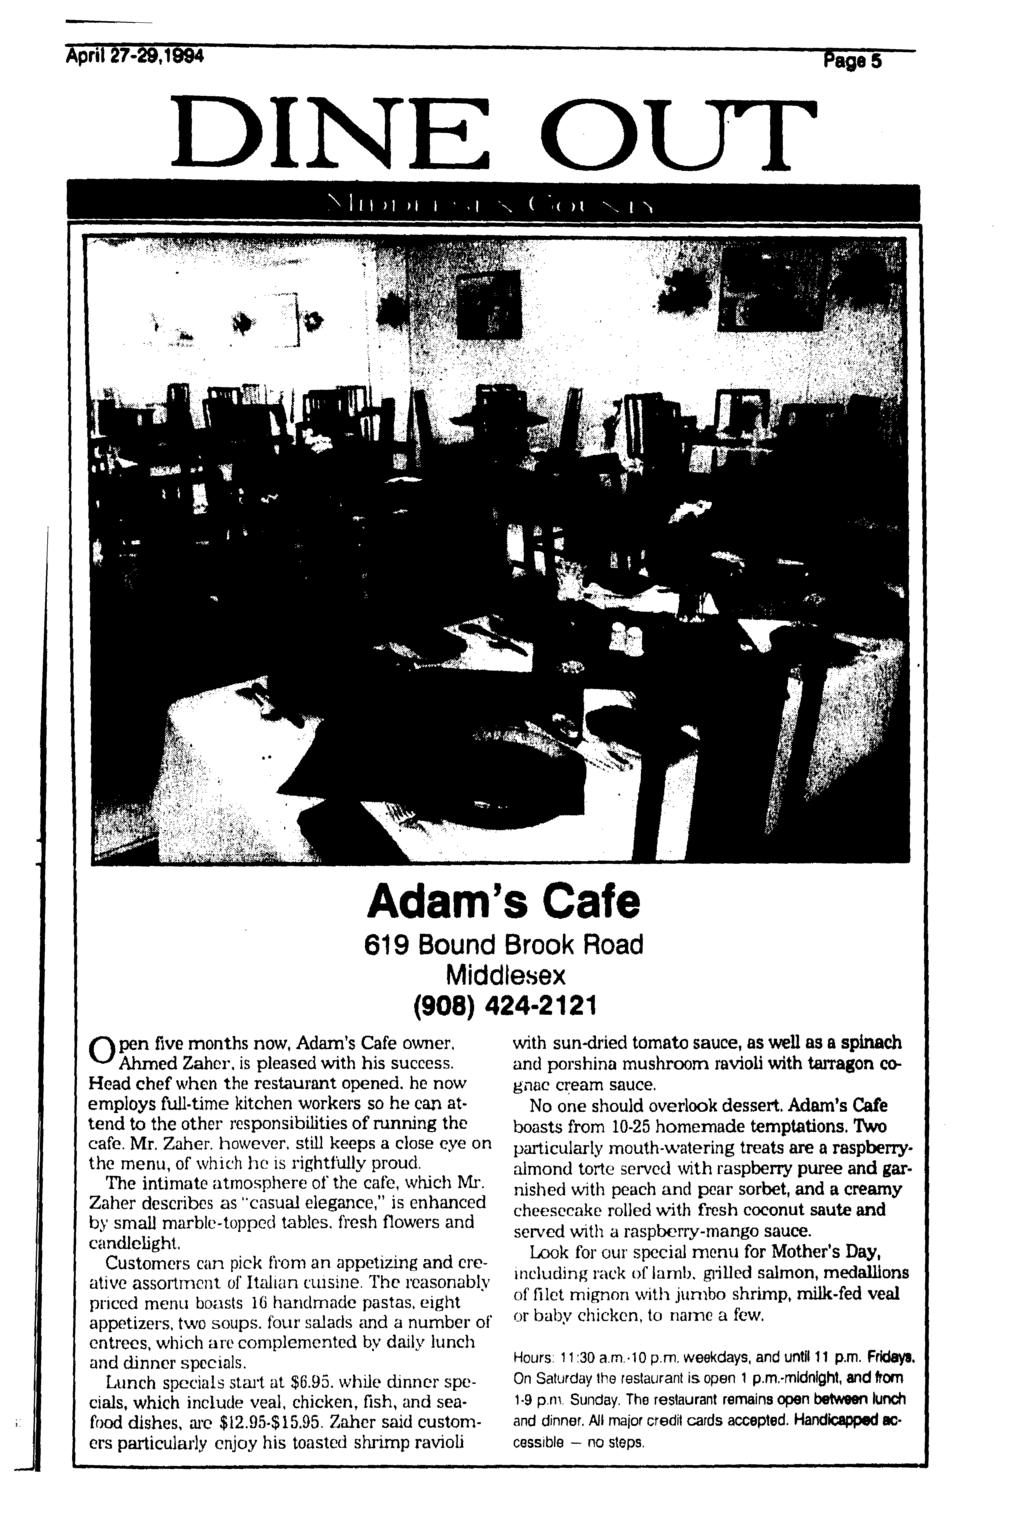 April 27-29,1994 DINE OUT 1 i > i H \n Adam's Cafe 619 Bound Brook Road Middlesex (908) 424-2121 five months now, Adam's Cafe owner, Ahmed Zaher, is pleased with his success.